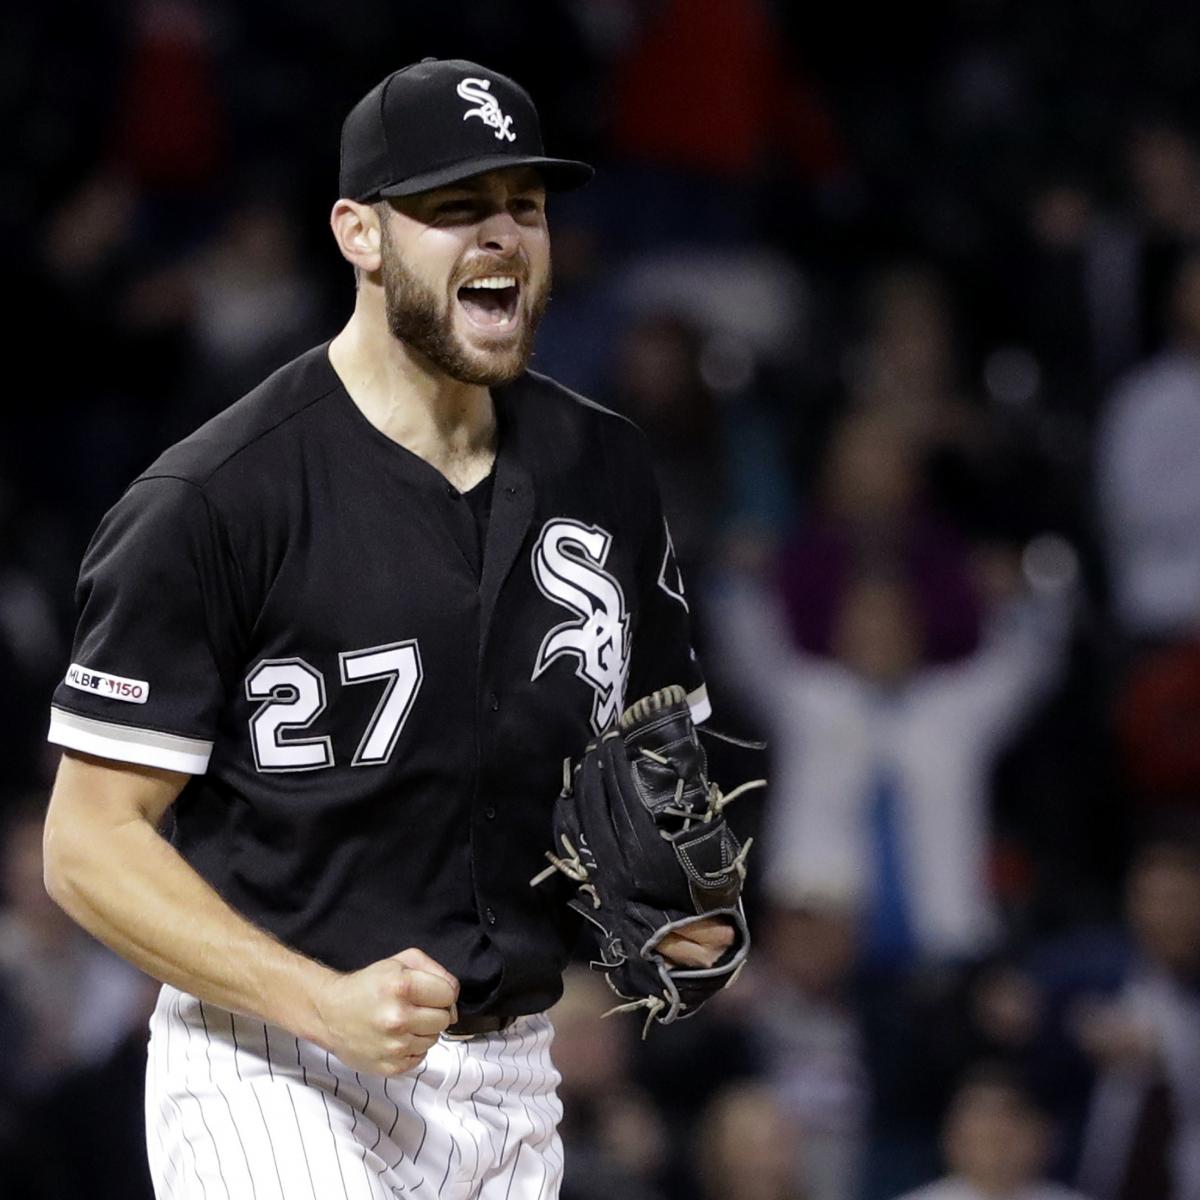 How high? Lucas Giolito stabilized his arm slot and improved his